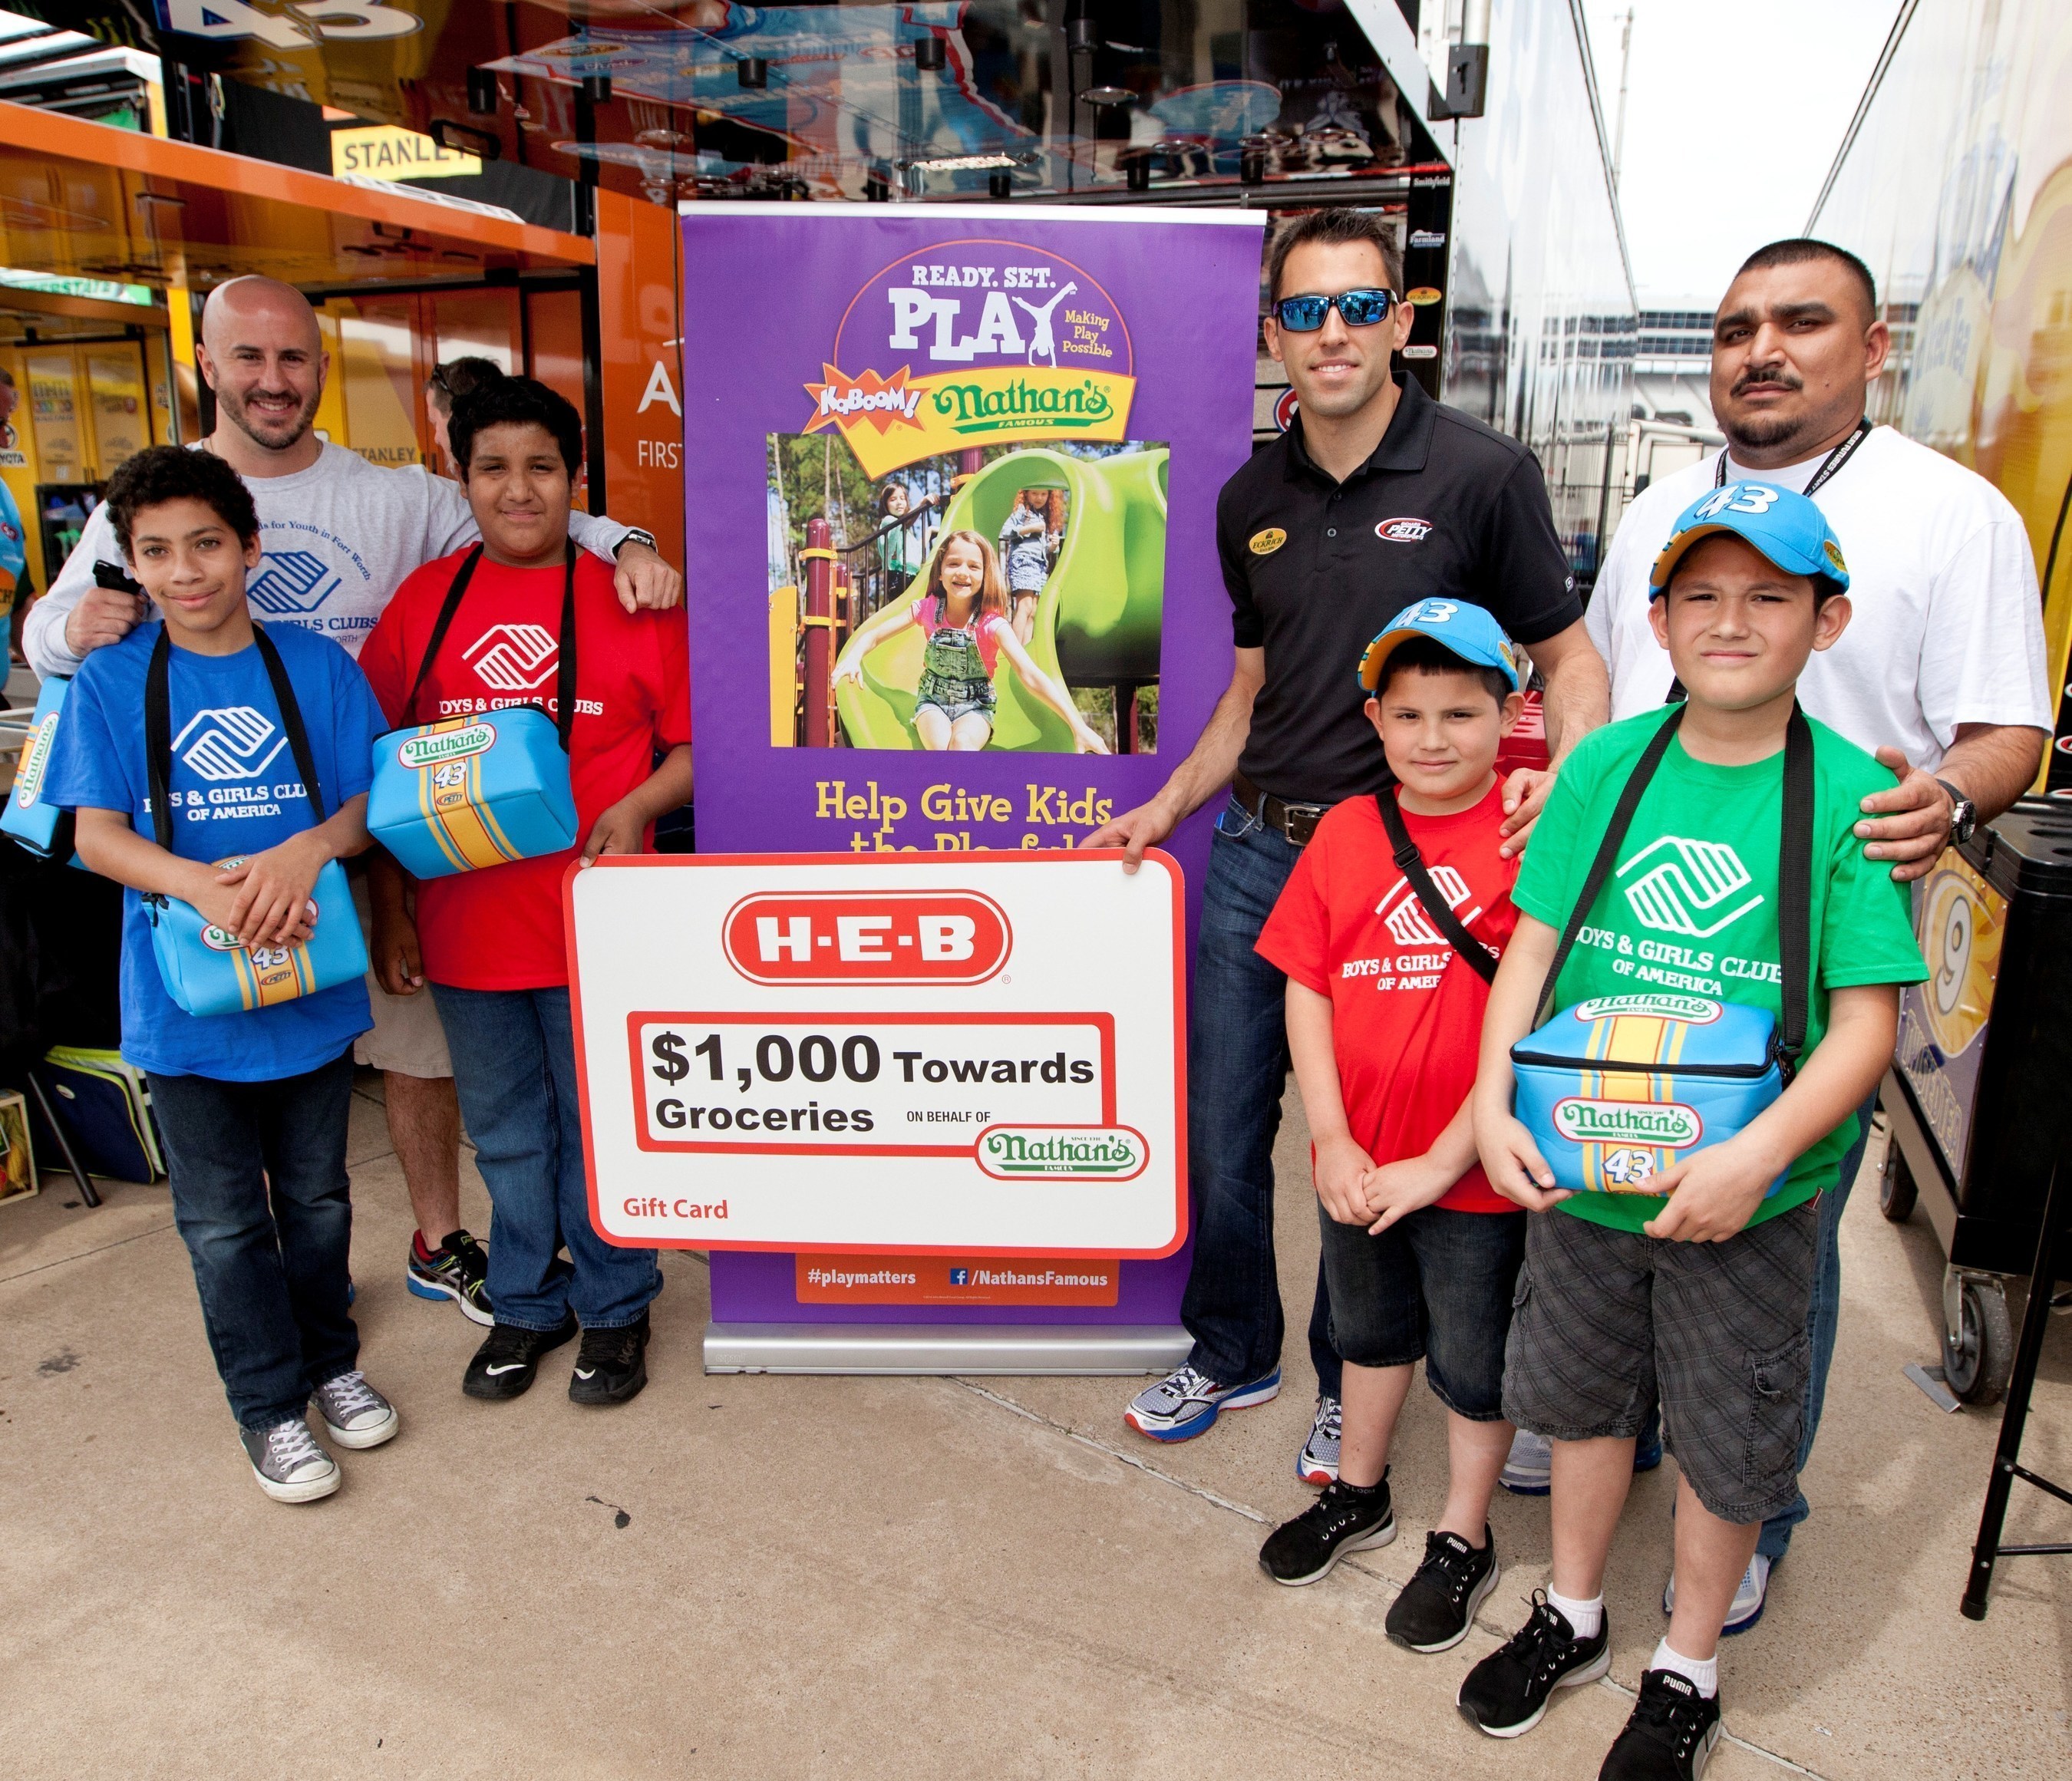 NASCAR driver Aric Almirola presented the Boys & Girls Clubs of Greater Fort Worth with an H-E-B gift card worth $1,000 towards the purchase of groceries, courtesy of Nathan's Famous.